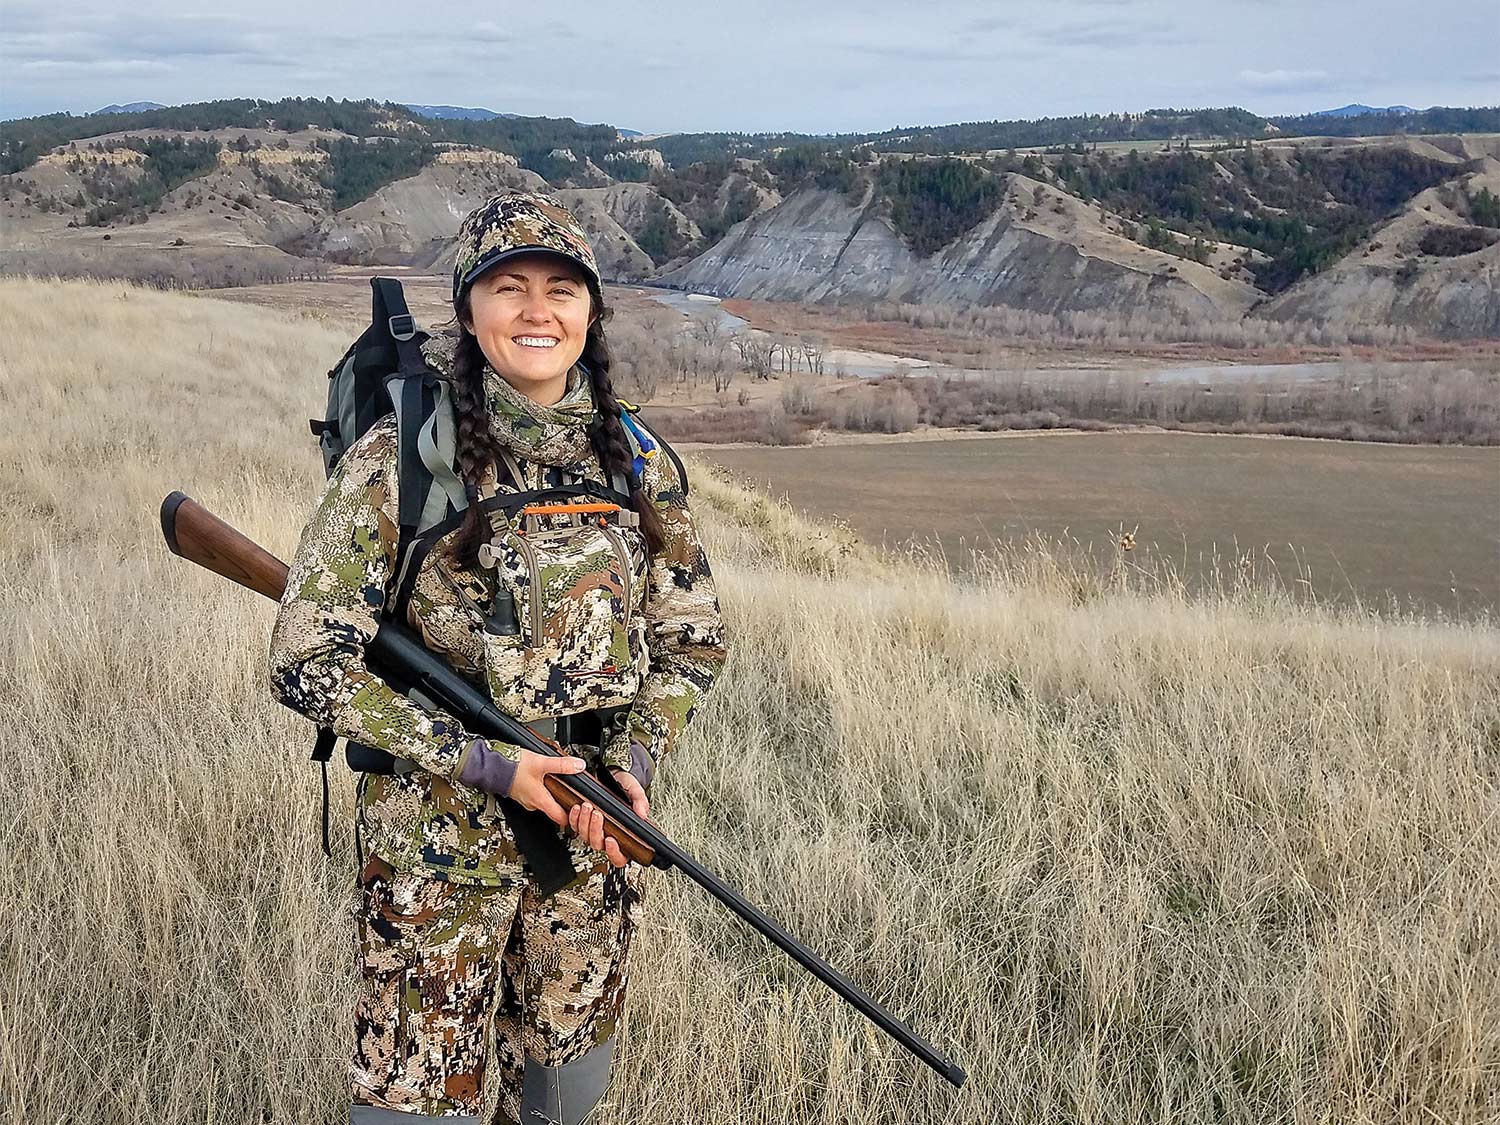 A woman wearing full camo and holding a shotgun stands in a large midwestern plain with hills and mountains in the background.